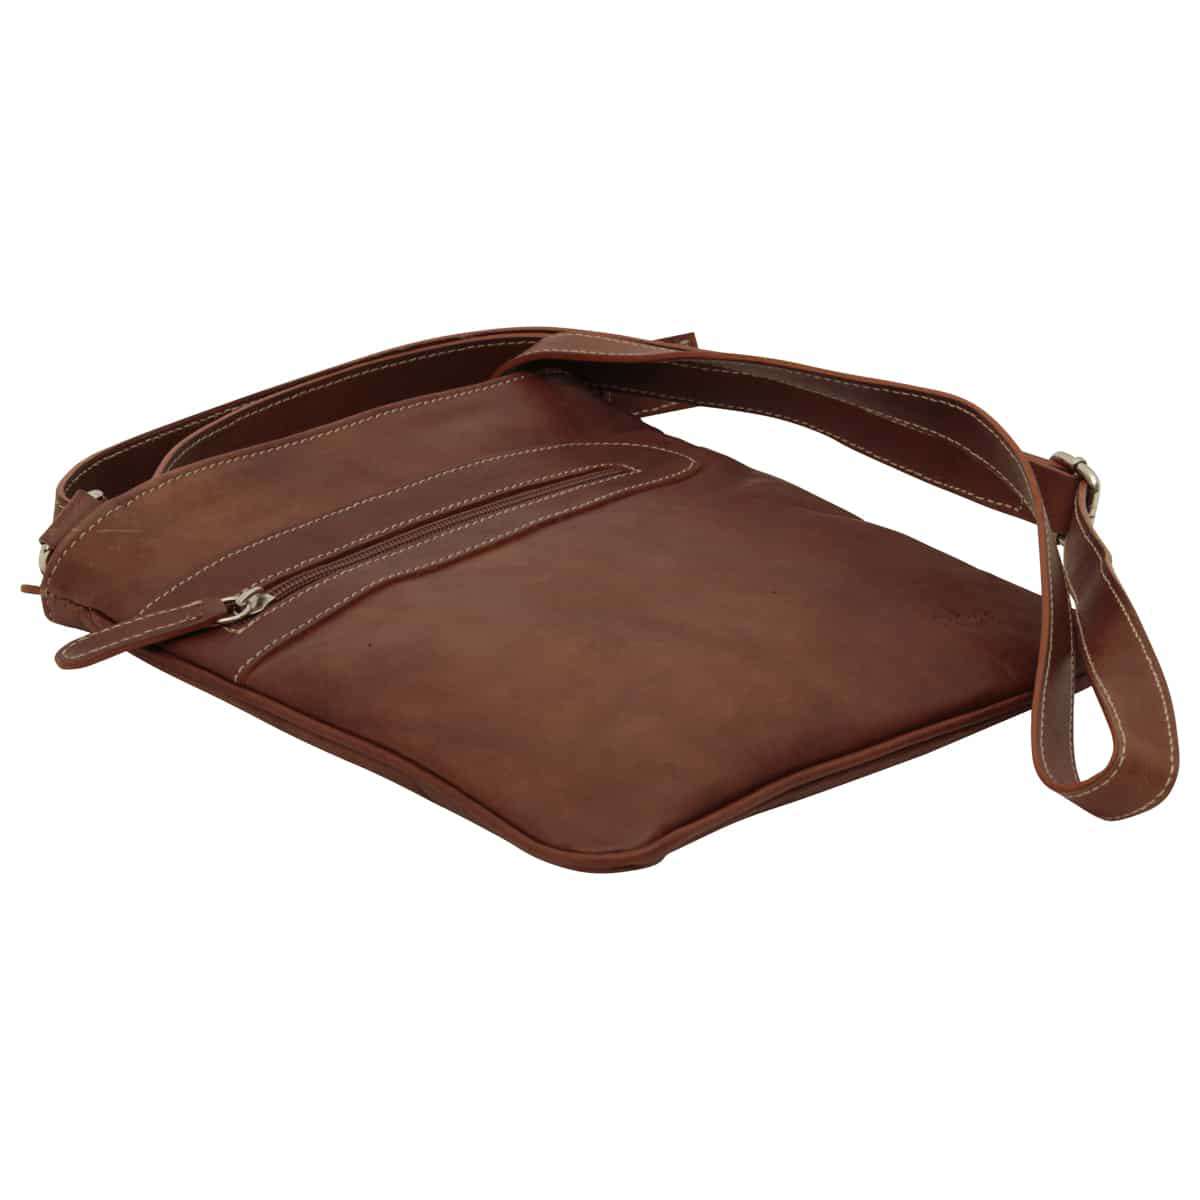 Leather cross body bag with zip pocket - Chestnut | 086161CA | EURO | Old Angler Firenze